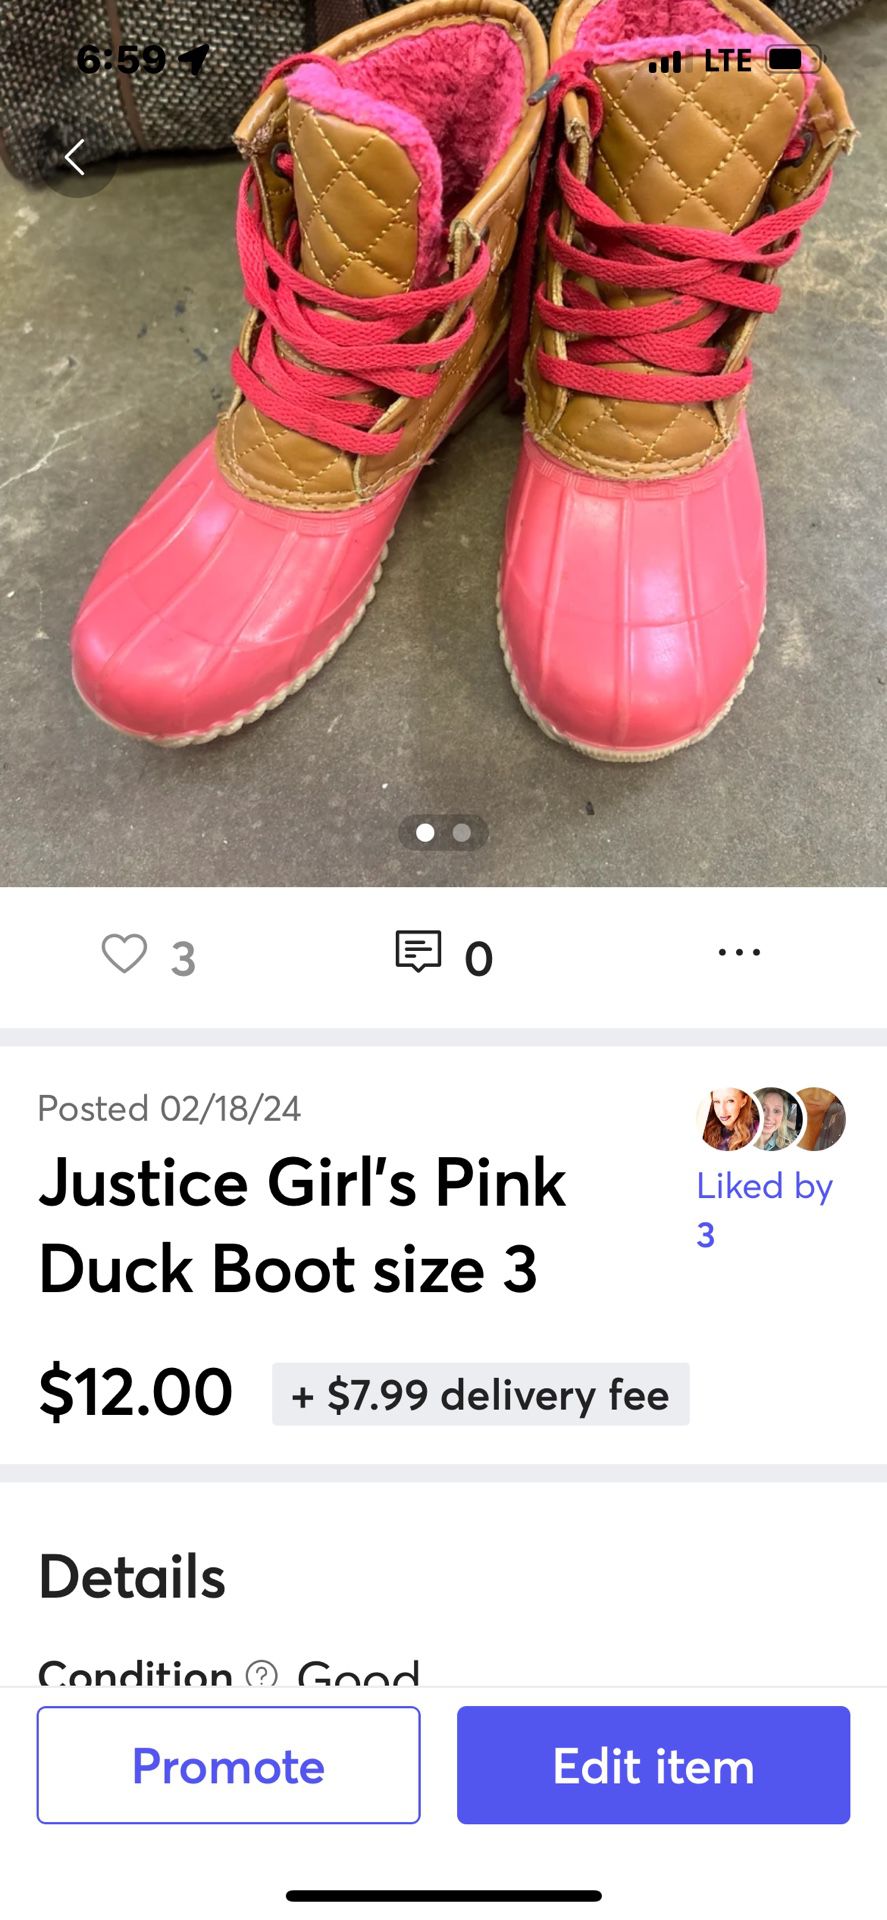 Justice Girl's Pink Duck Boot size 3